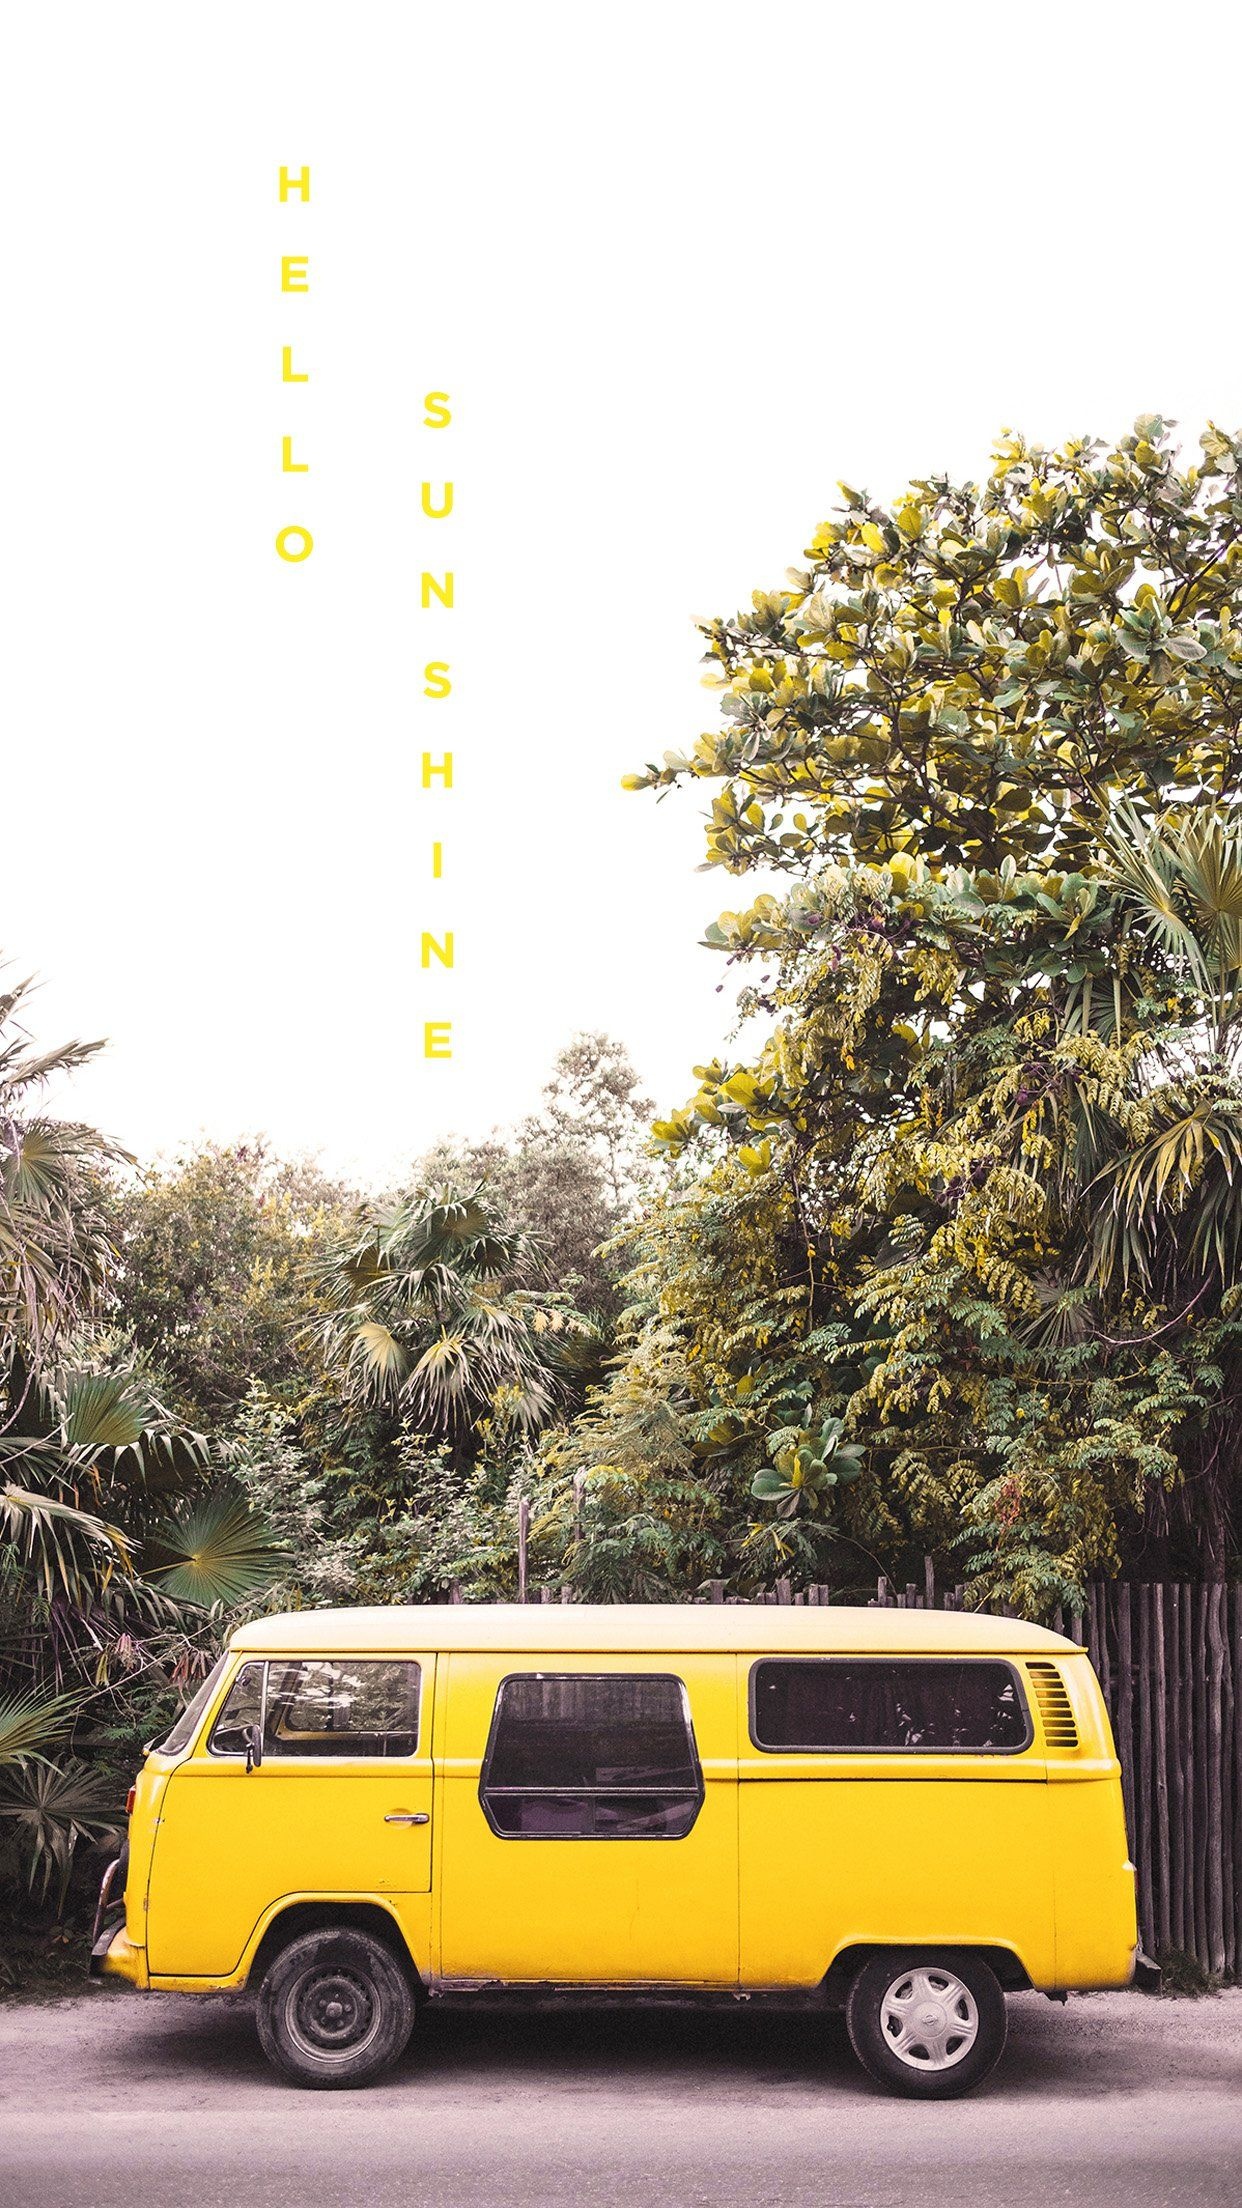 Little Miss Sunshine: The family goes on an 800-mile road trip in their yellow Volkswagen van, Movie plot. 1250x2210 HD Wallpaper.